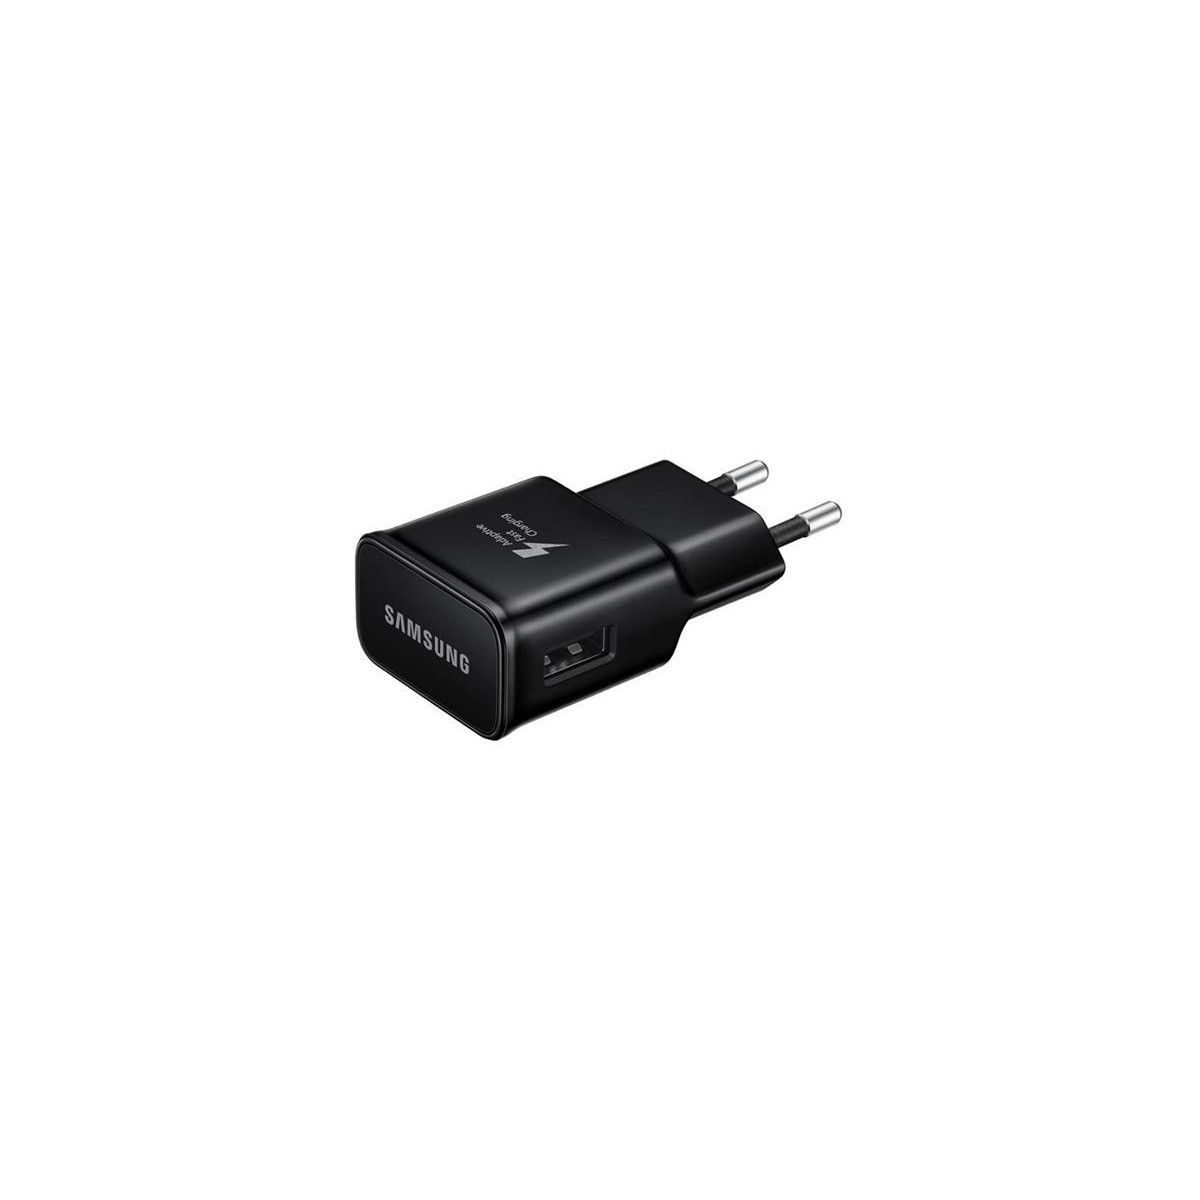 More about Adaptér USB SAMSUNG EP-TA20EB